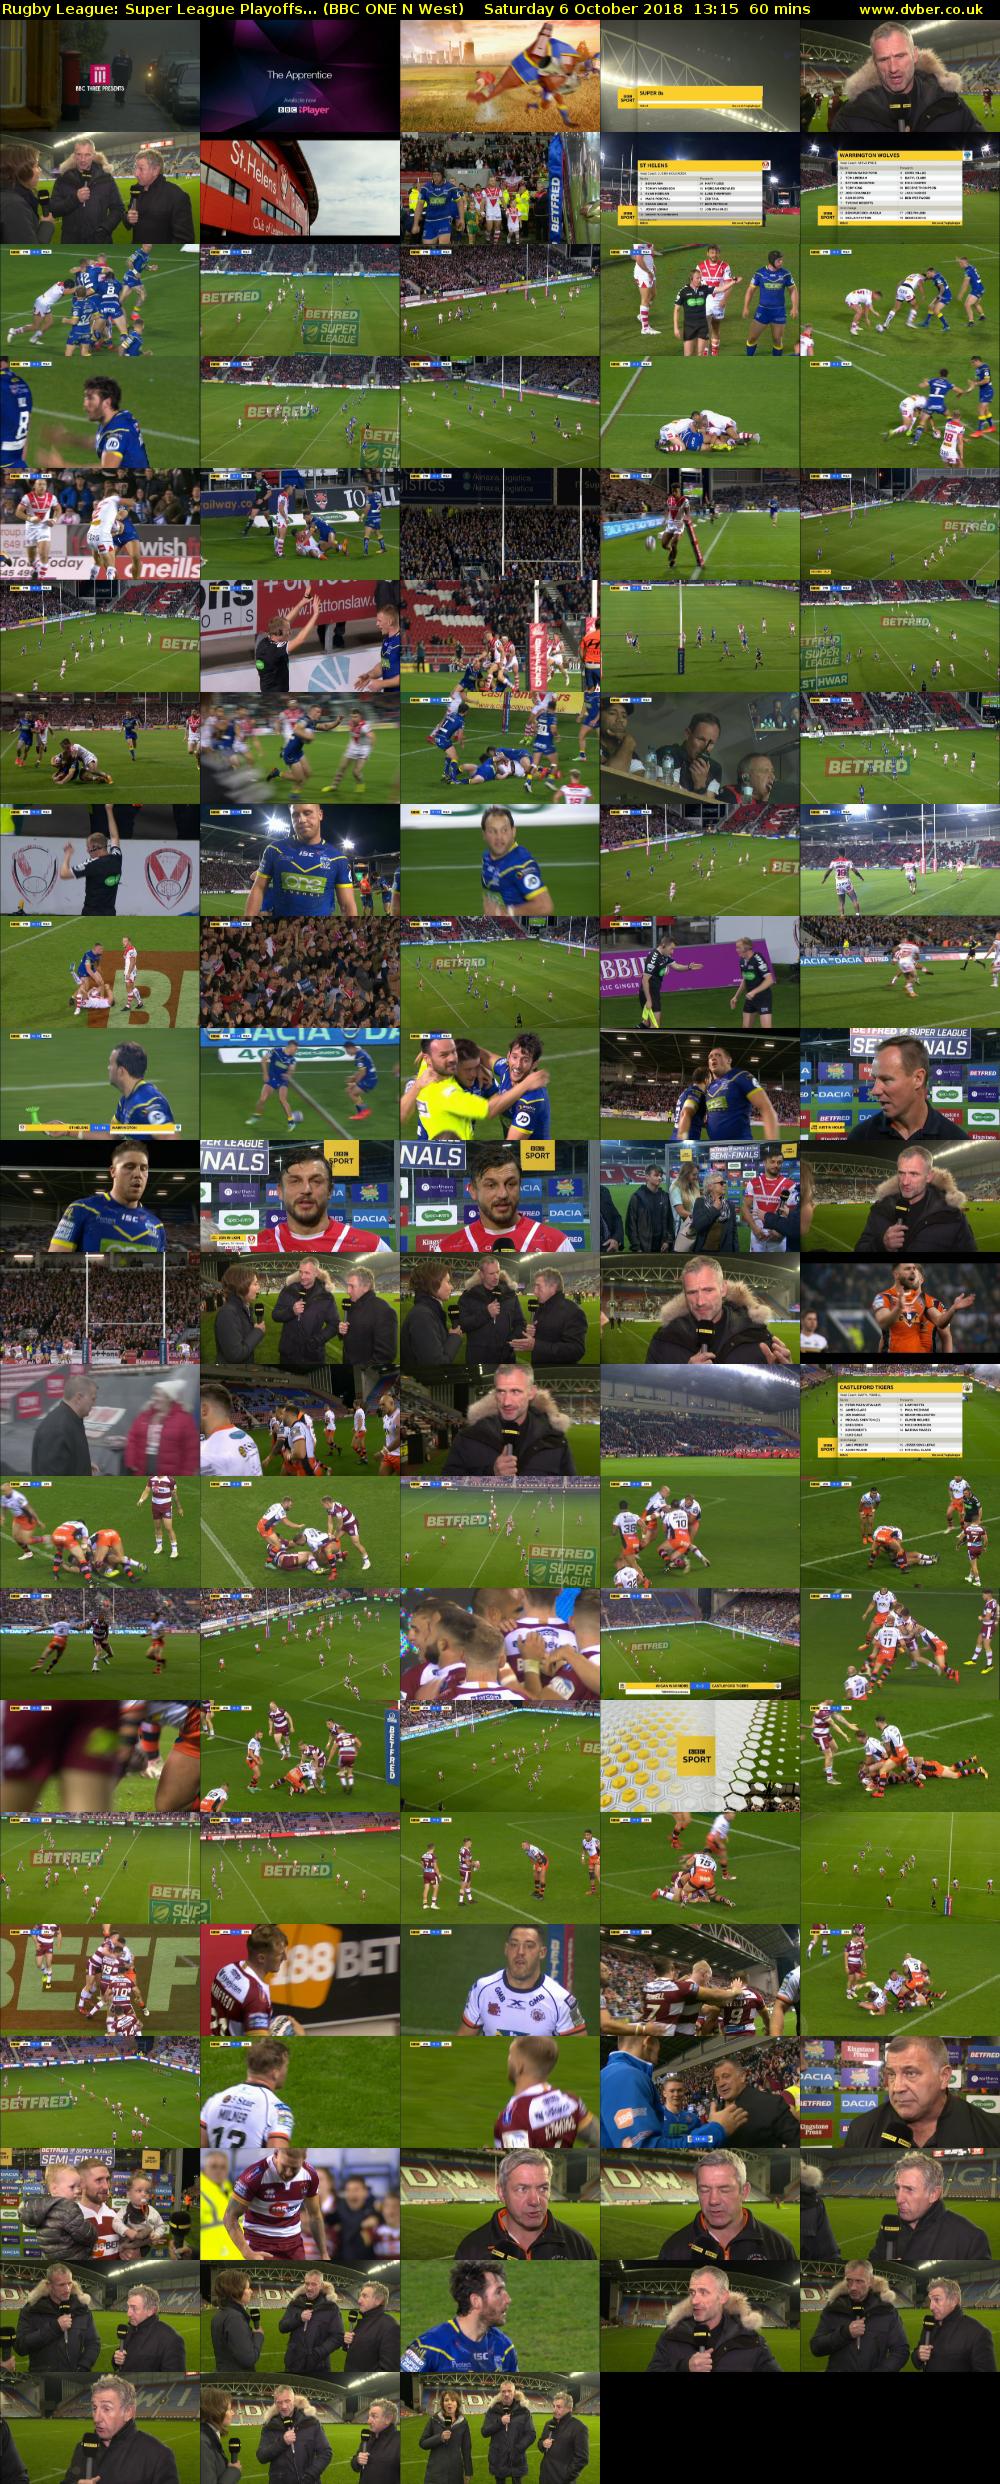 Rugby League: Super League Playoffs... (BBC ONE N West) Saturday 6 October 2018 13:15 - 14:15